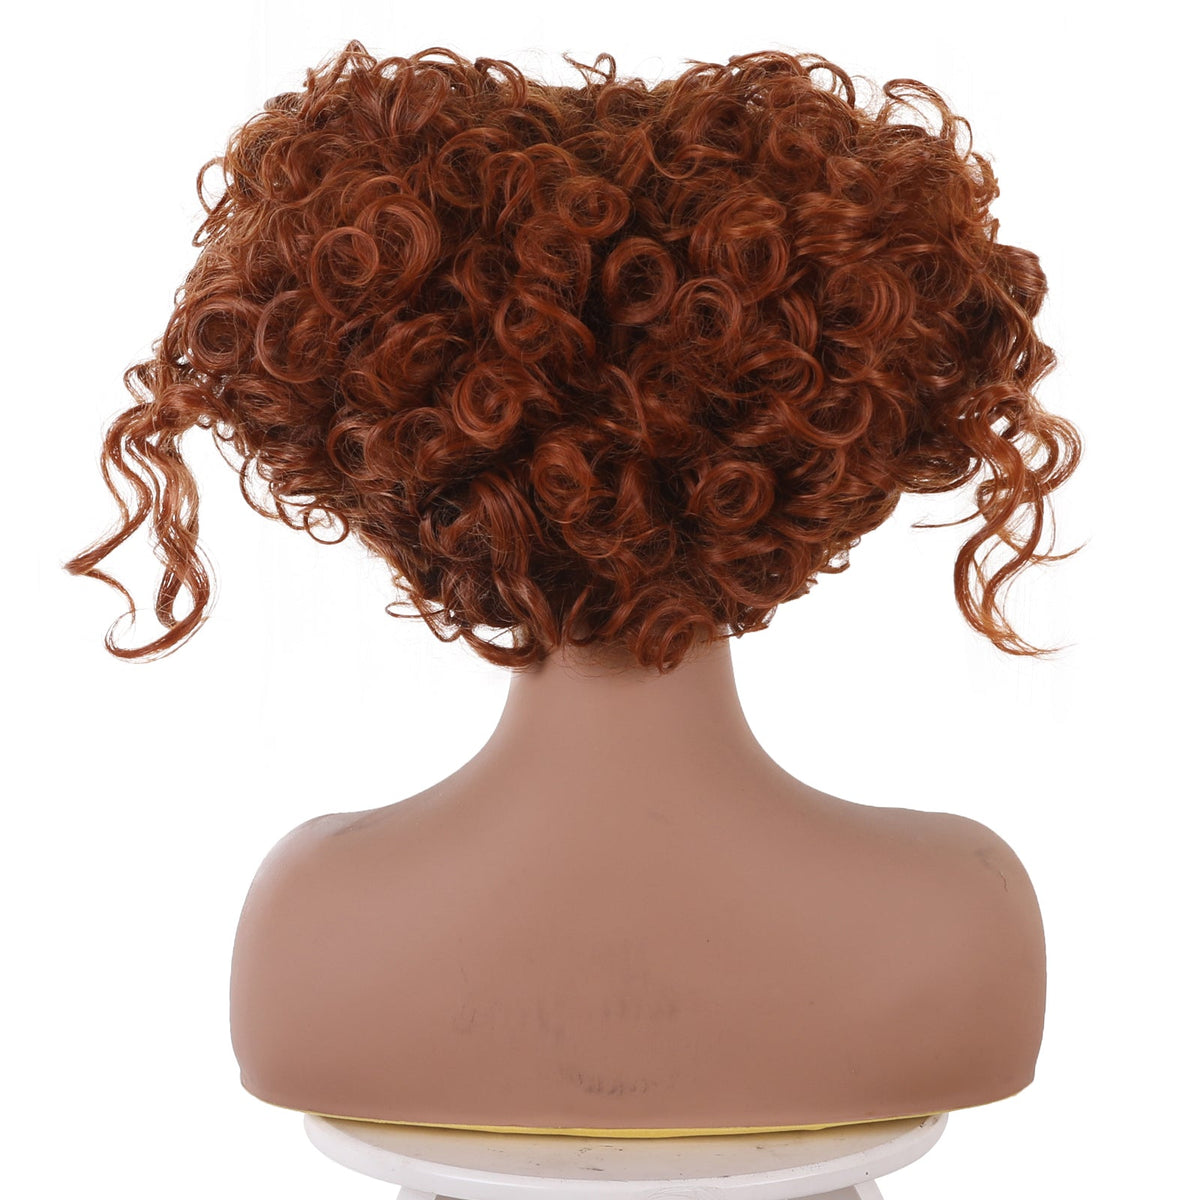 Hocus Pocus 2 Winifred Sanderson heart-shaped Brown short Movie Cosplay Halloween cosplay Wig Special Wig